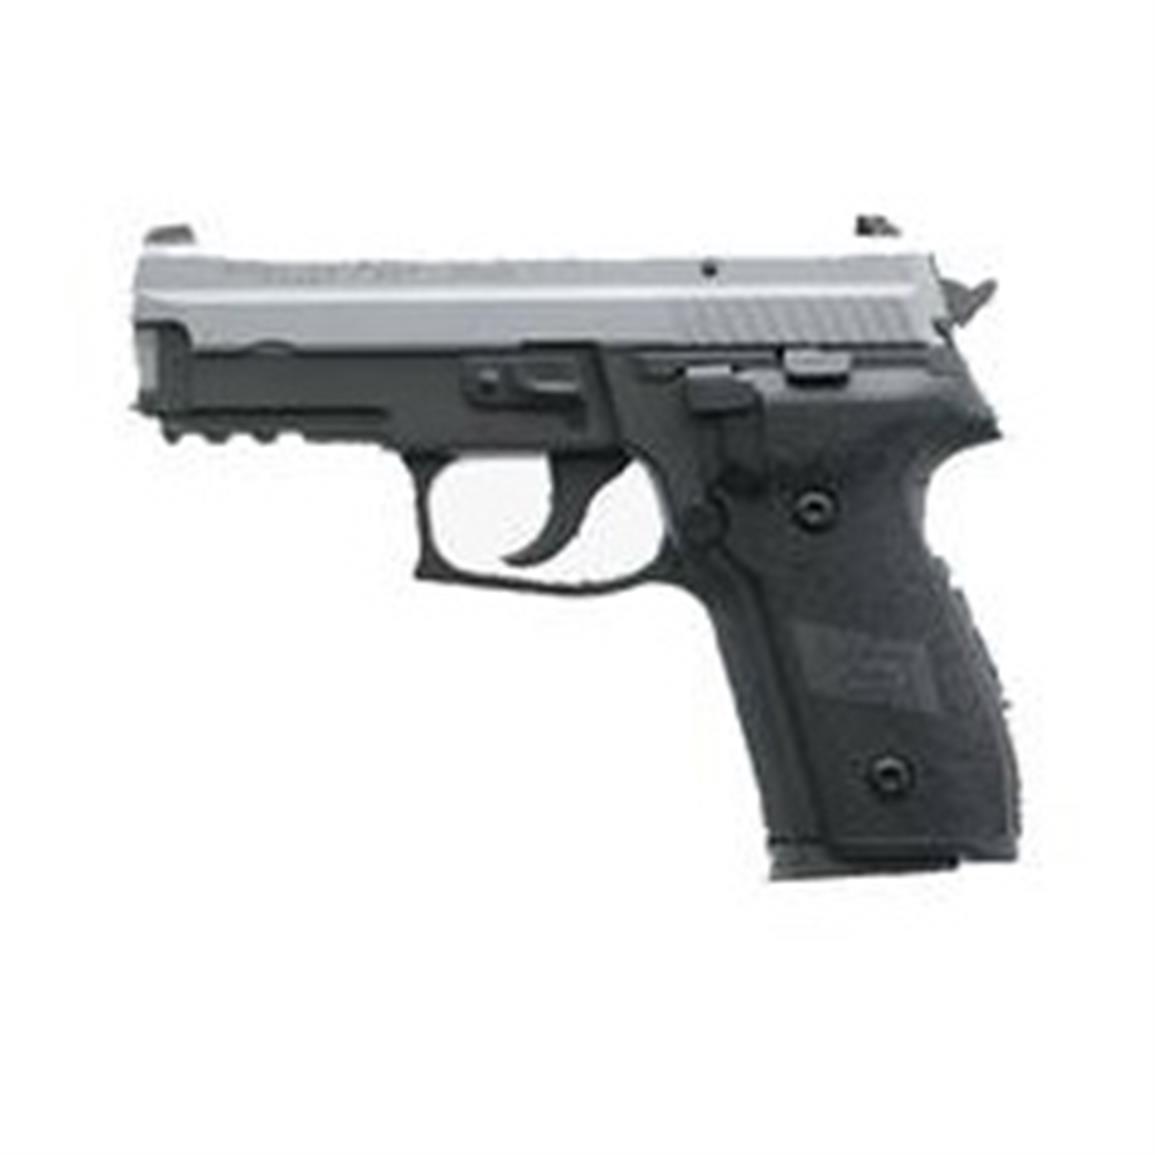 SIG SAUER P229 Duo Tone, Semi-automatic, 9mm, WE29R9TSS, 798681423880, 15-rd.